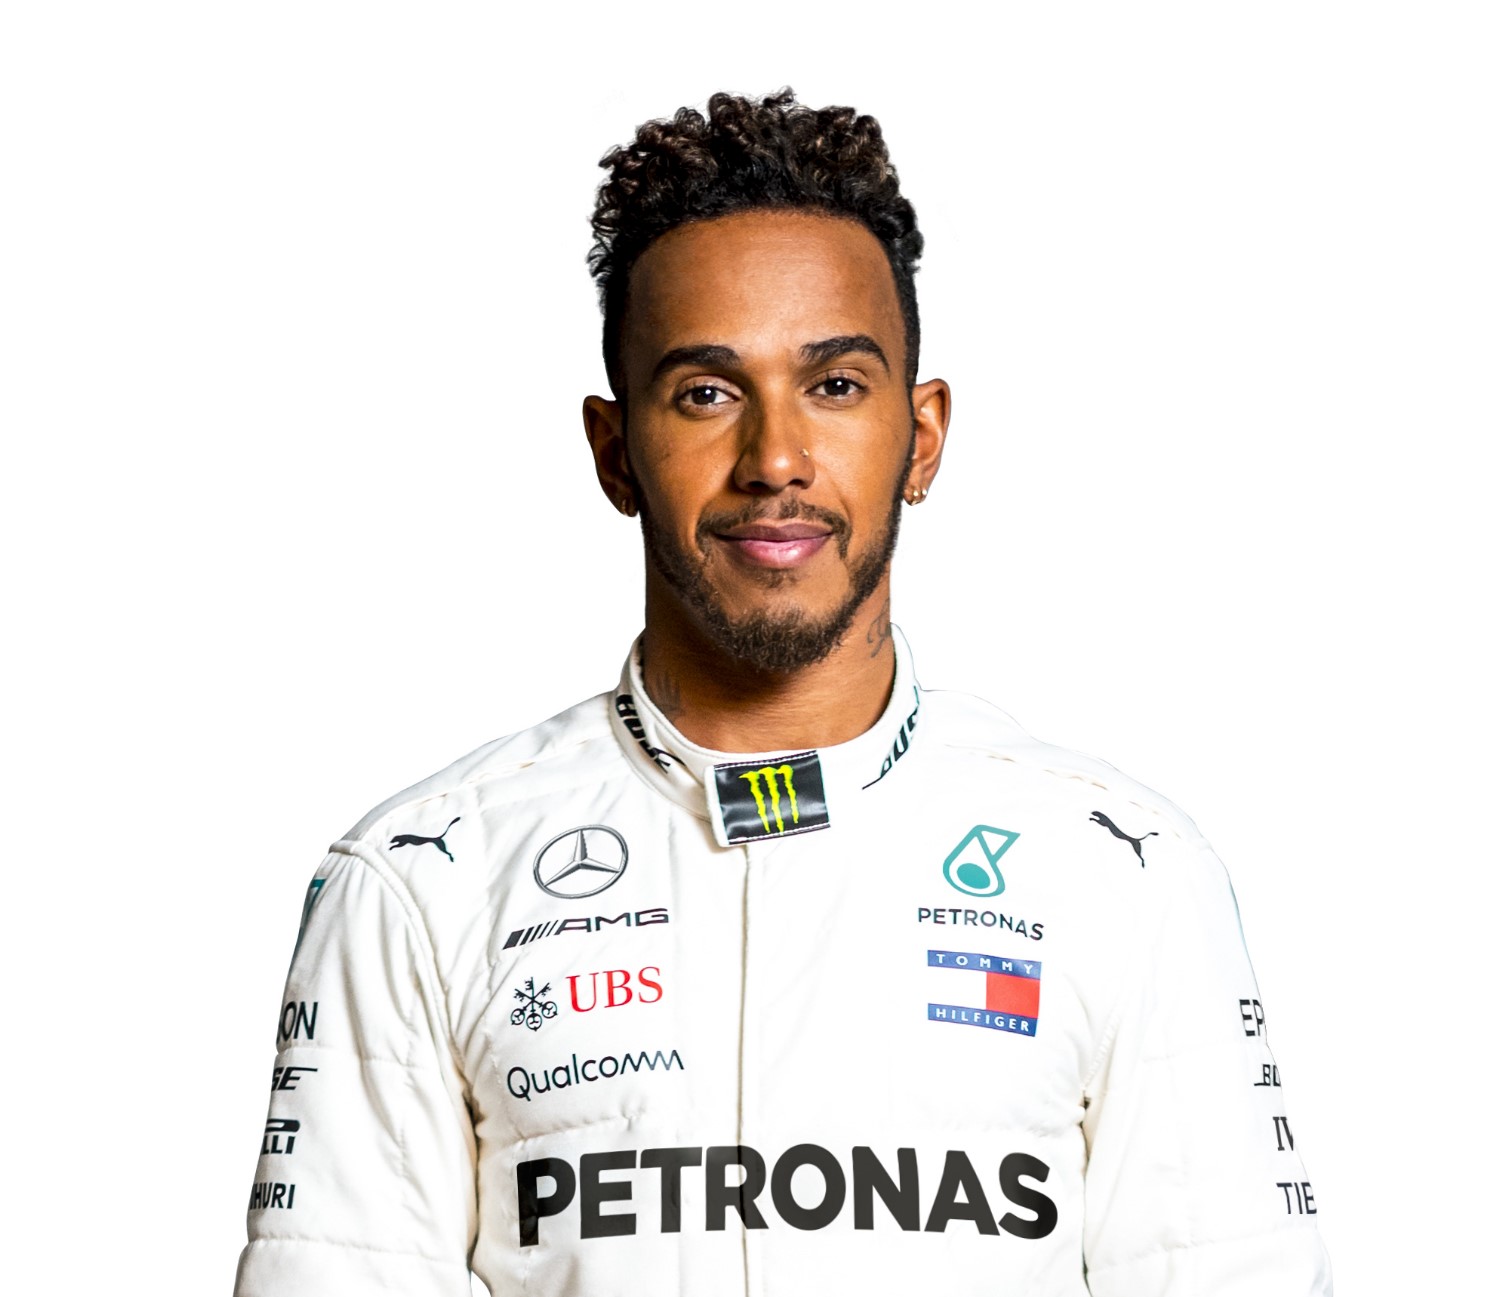 As soon as Hamilton resigns with Mercedes his car will be fast again